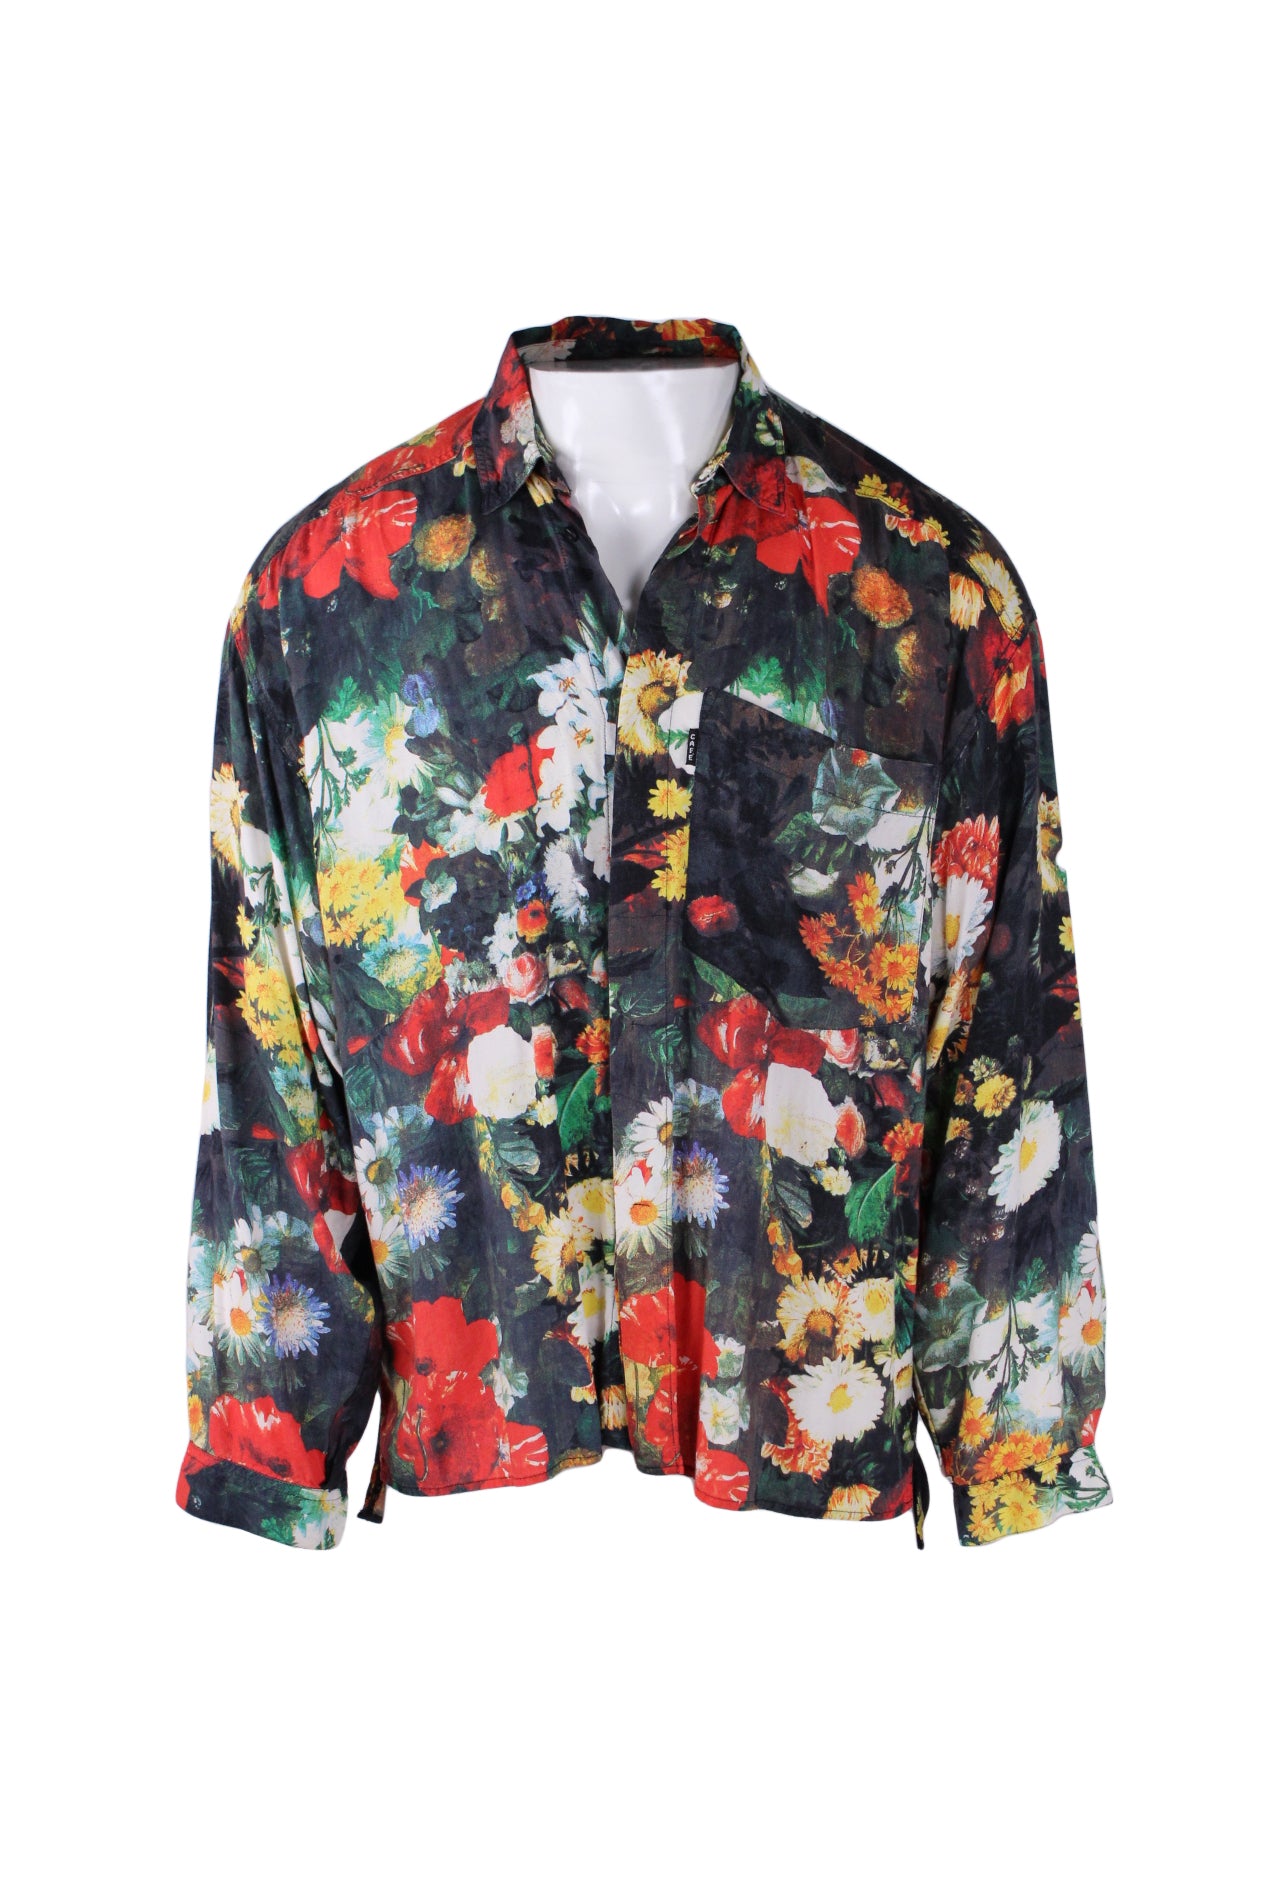 front angle of vintage cafe multicolored floral button up shirt on masc mannequin. features single pocket over heart with small embroidered branded patch 'cafe' , small pointed collar, buttoned sleeves, covered button closure up center, and all over abstract jewel toned print throughout. 